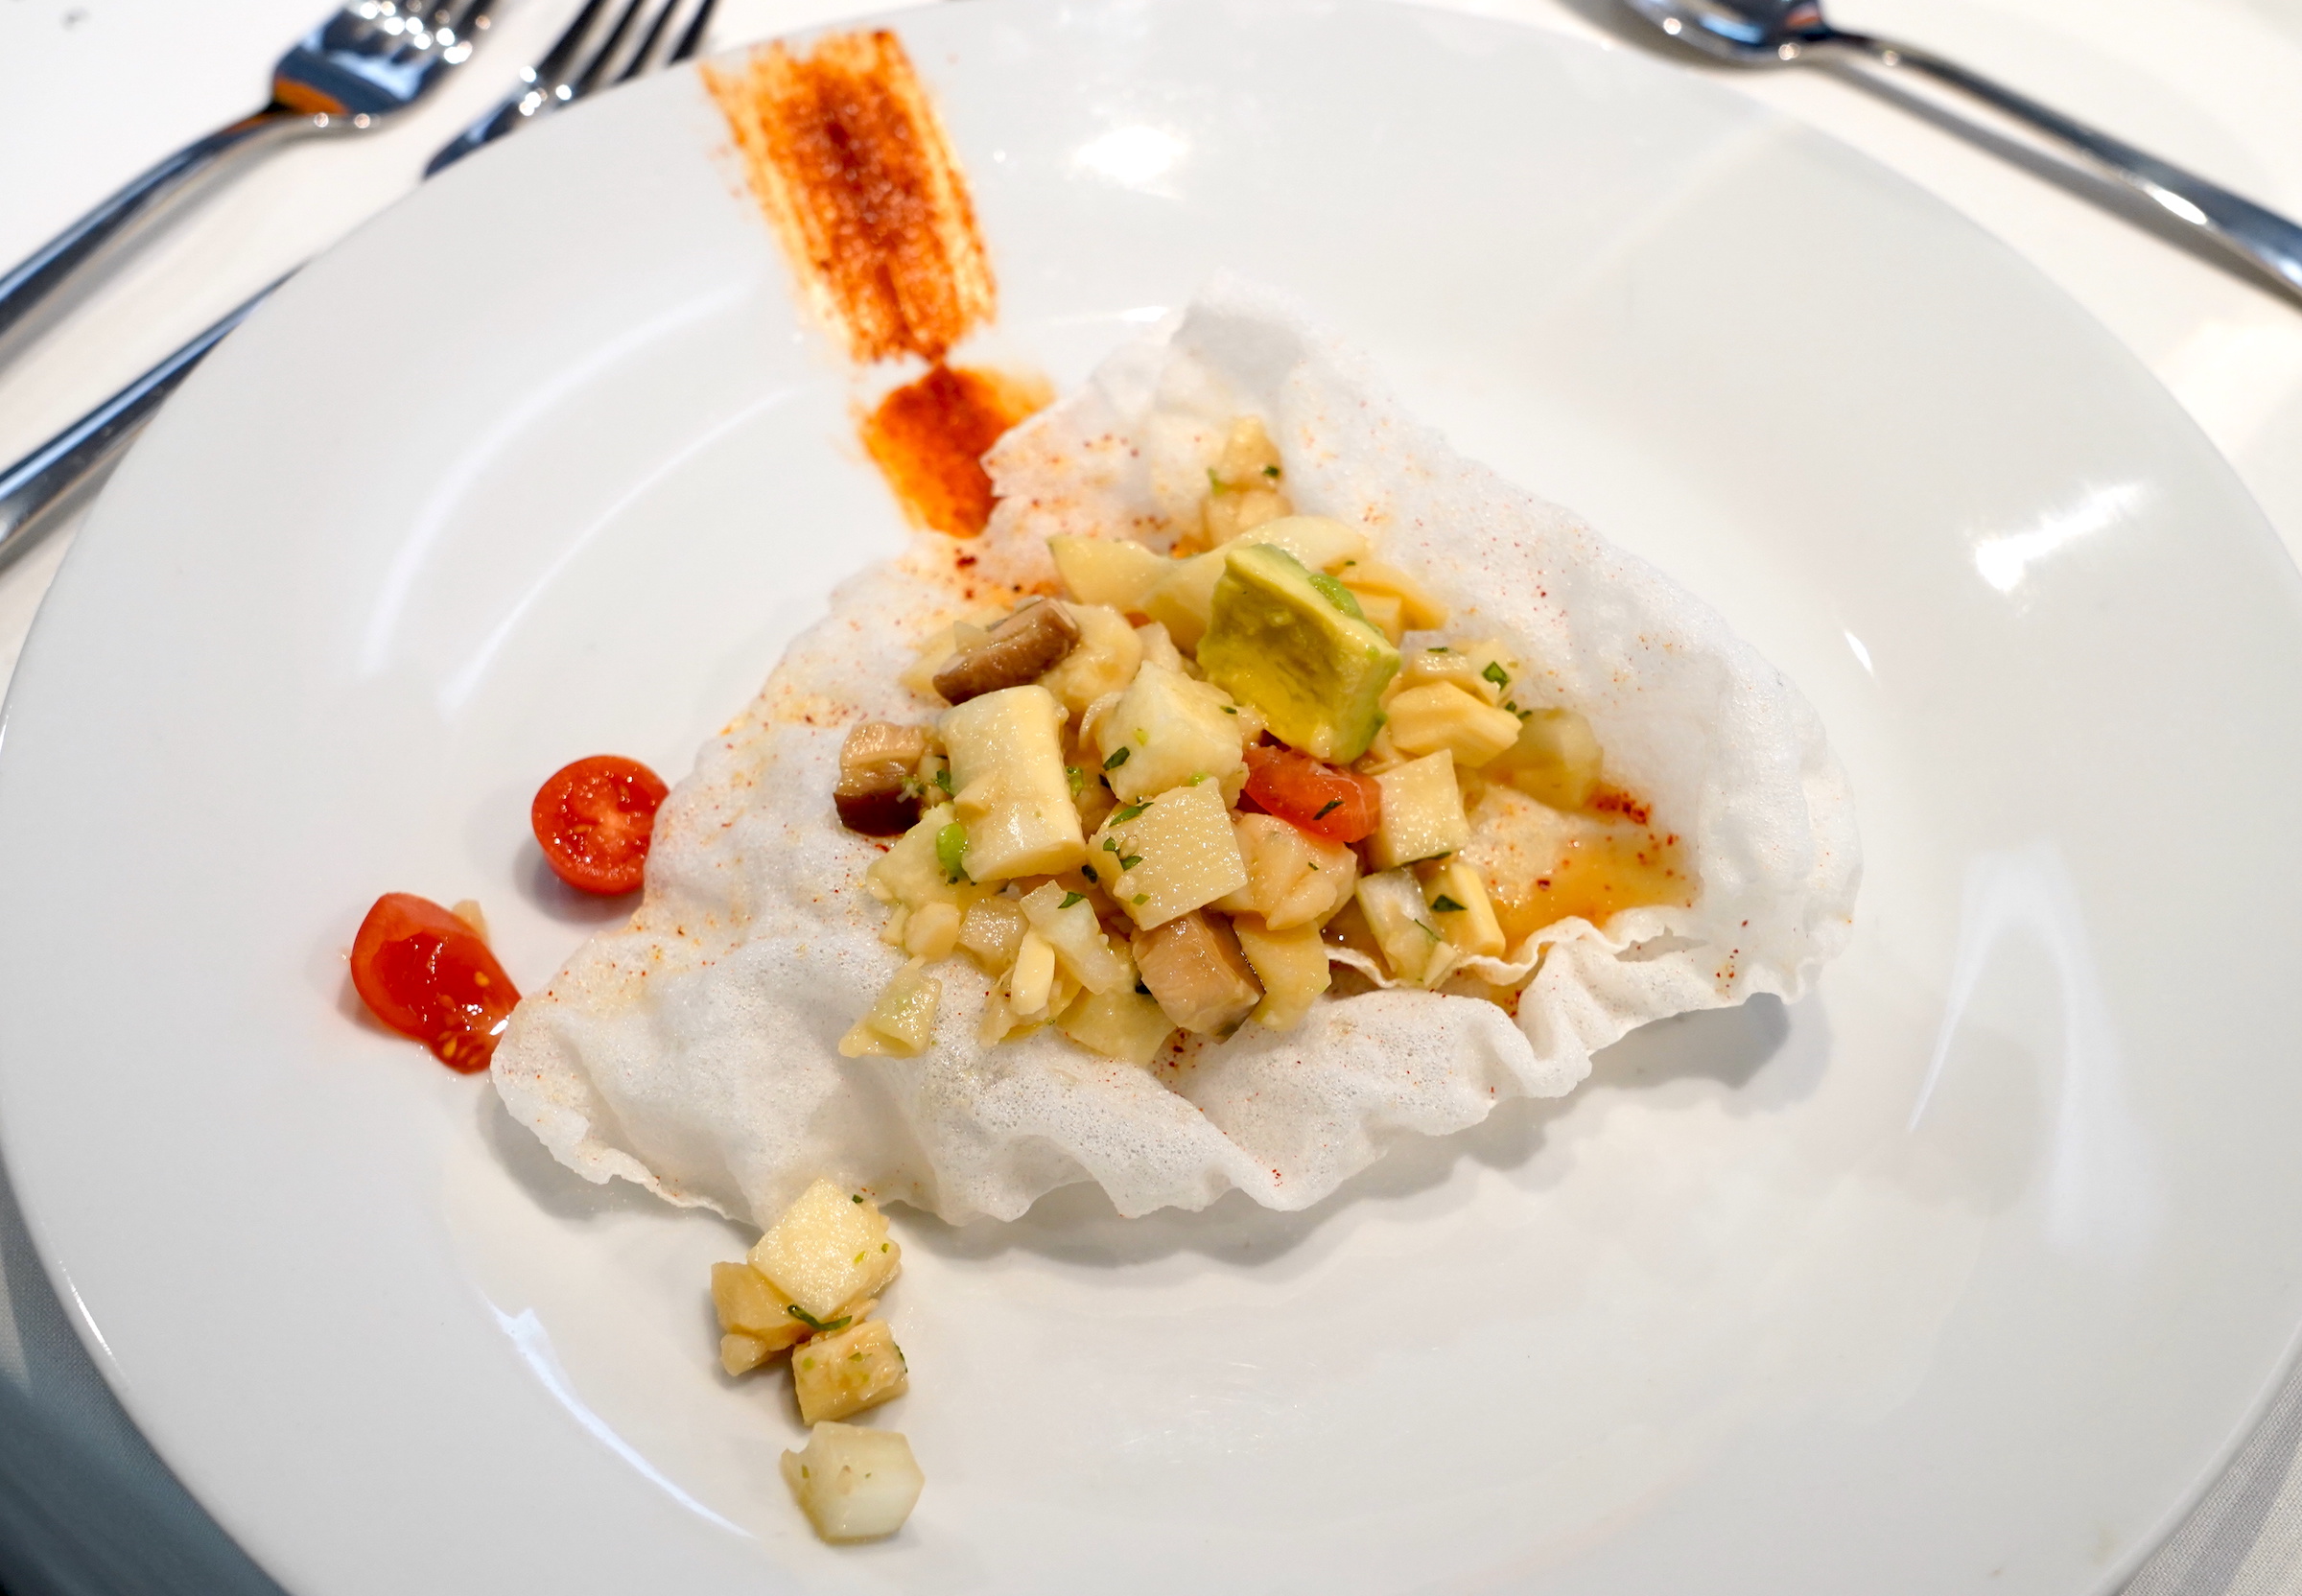 Plant-based ceviche on a rice cracker sits on a white plate